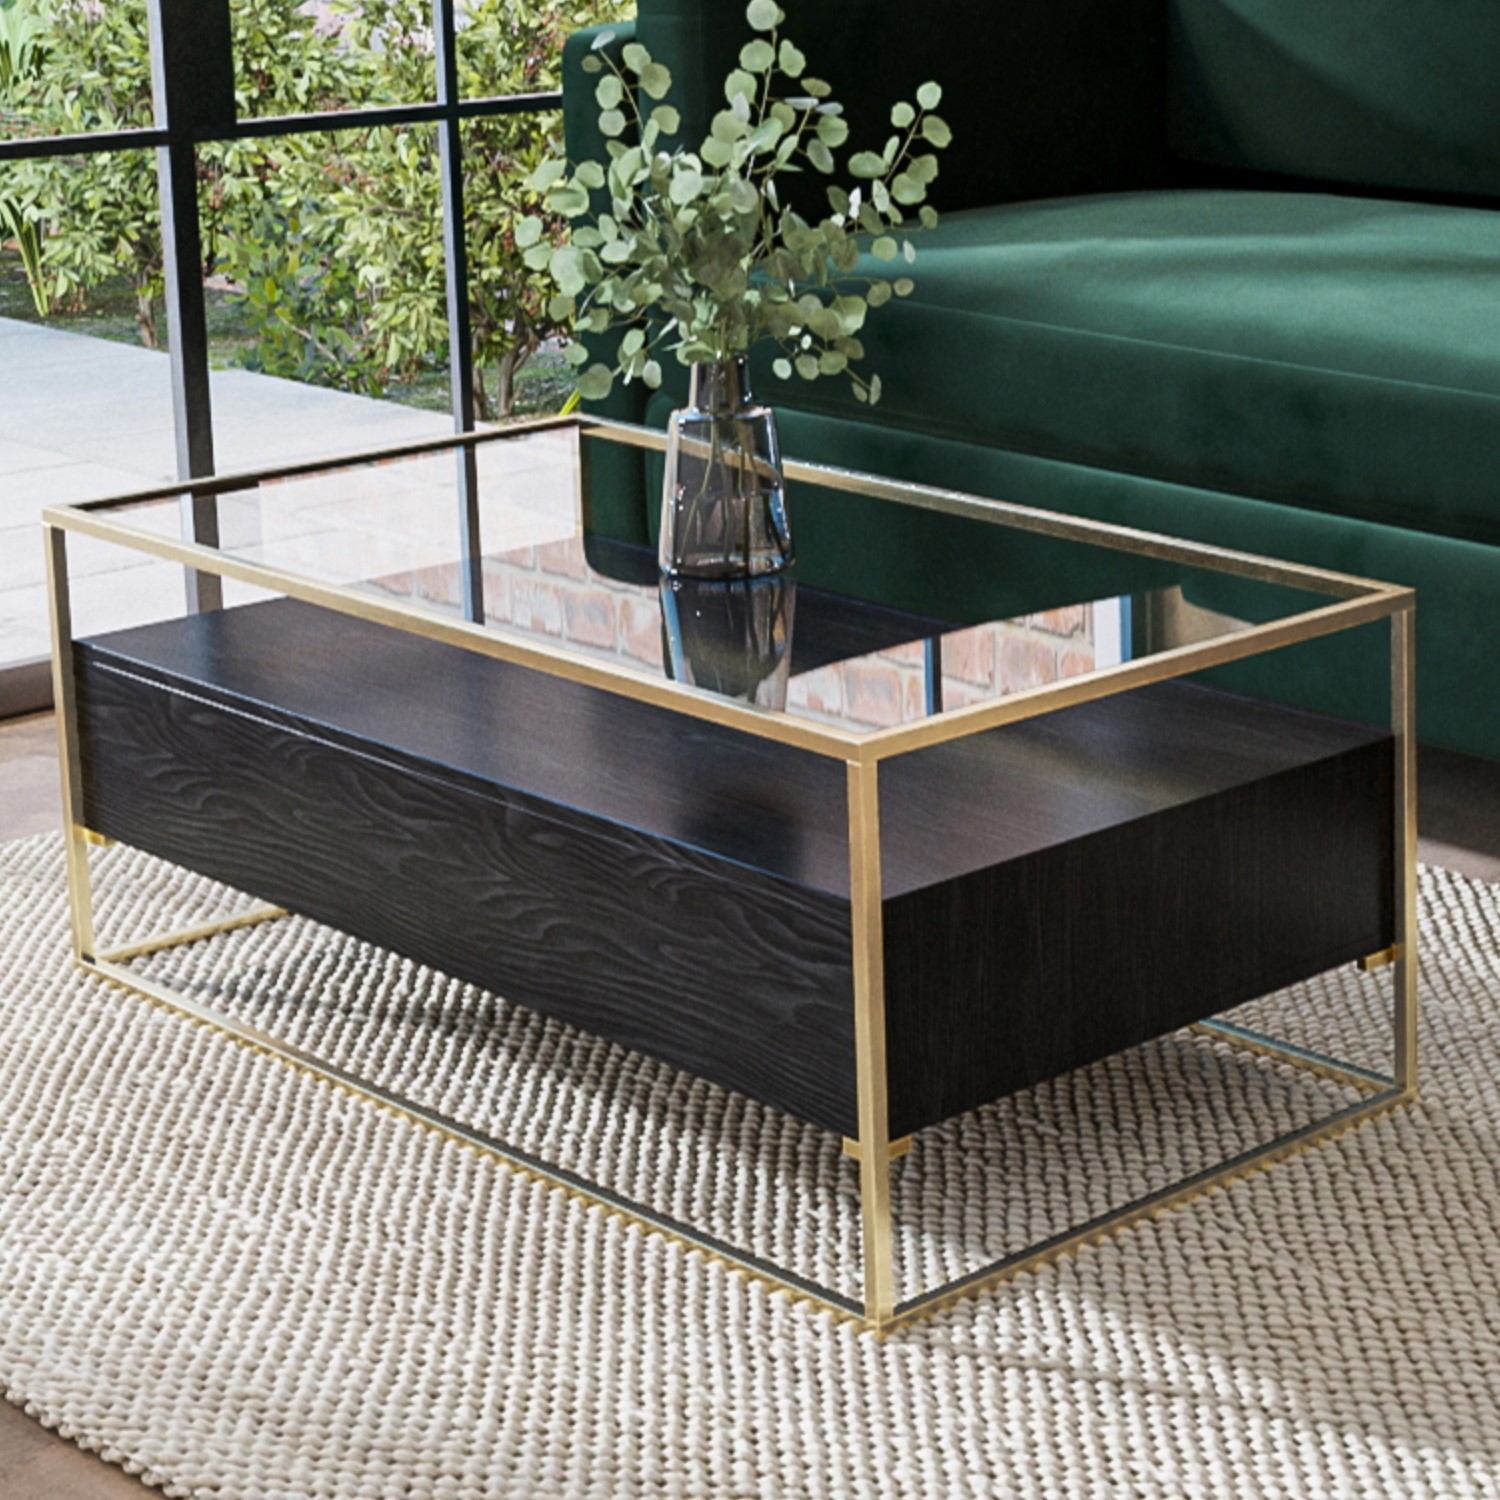 Photo of Large black coffee table with glass top and storage drawers - akila